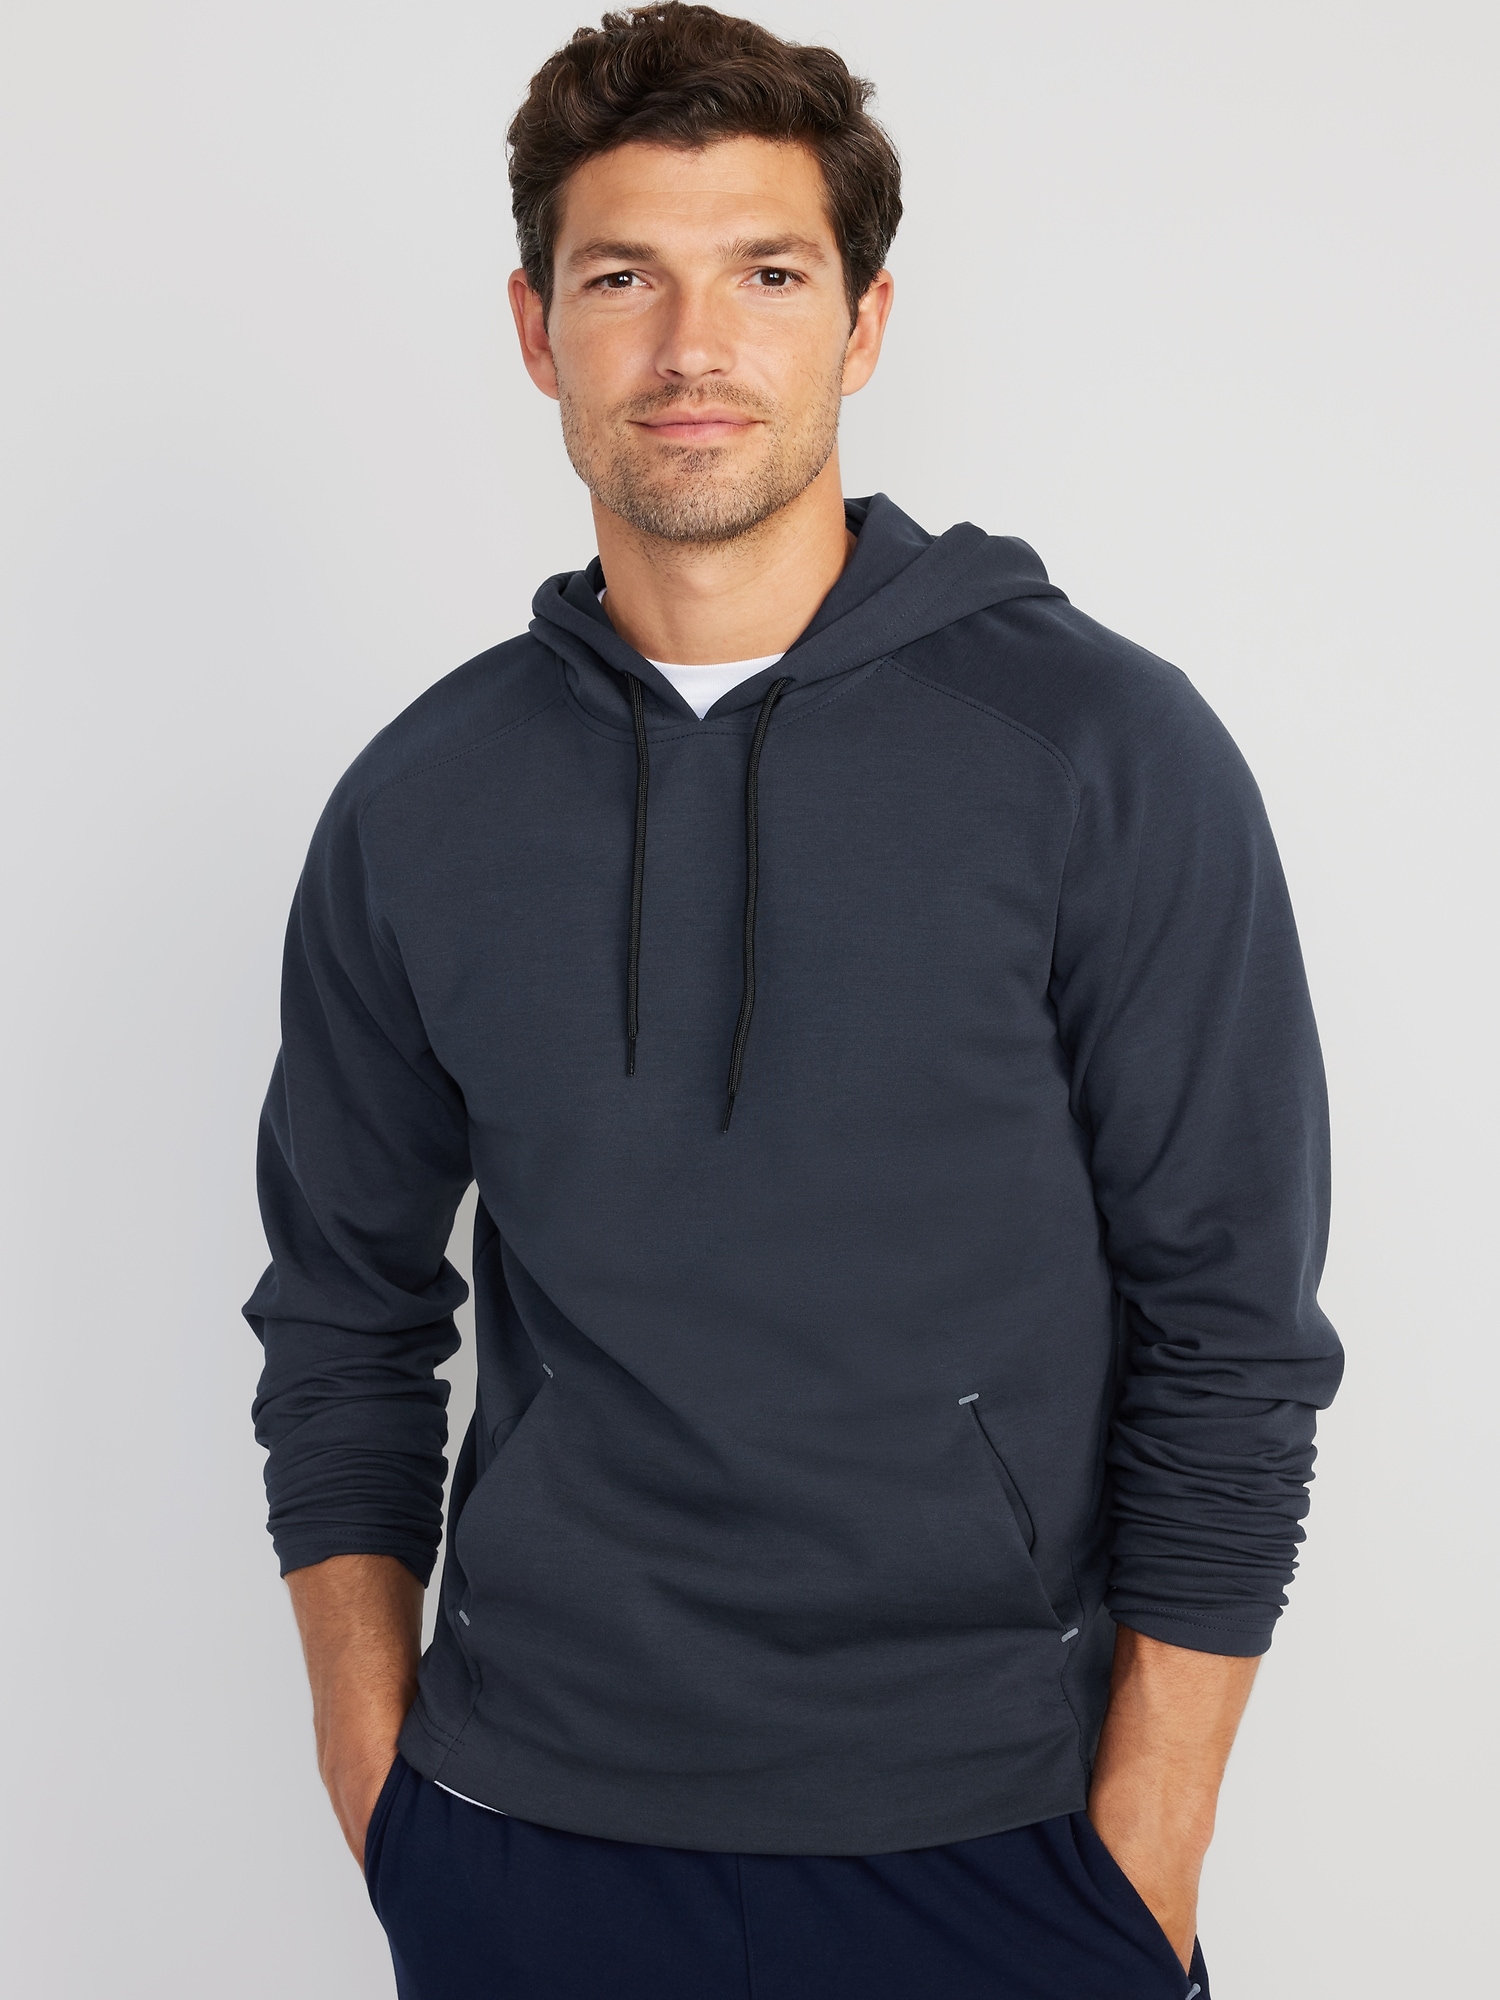 All In Motion Men's Textured Knit Hoodie, Navy, Small 